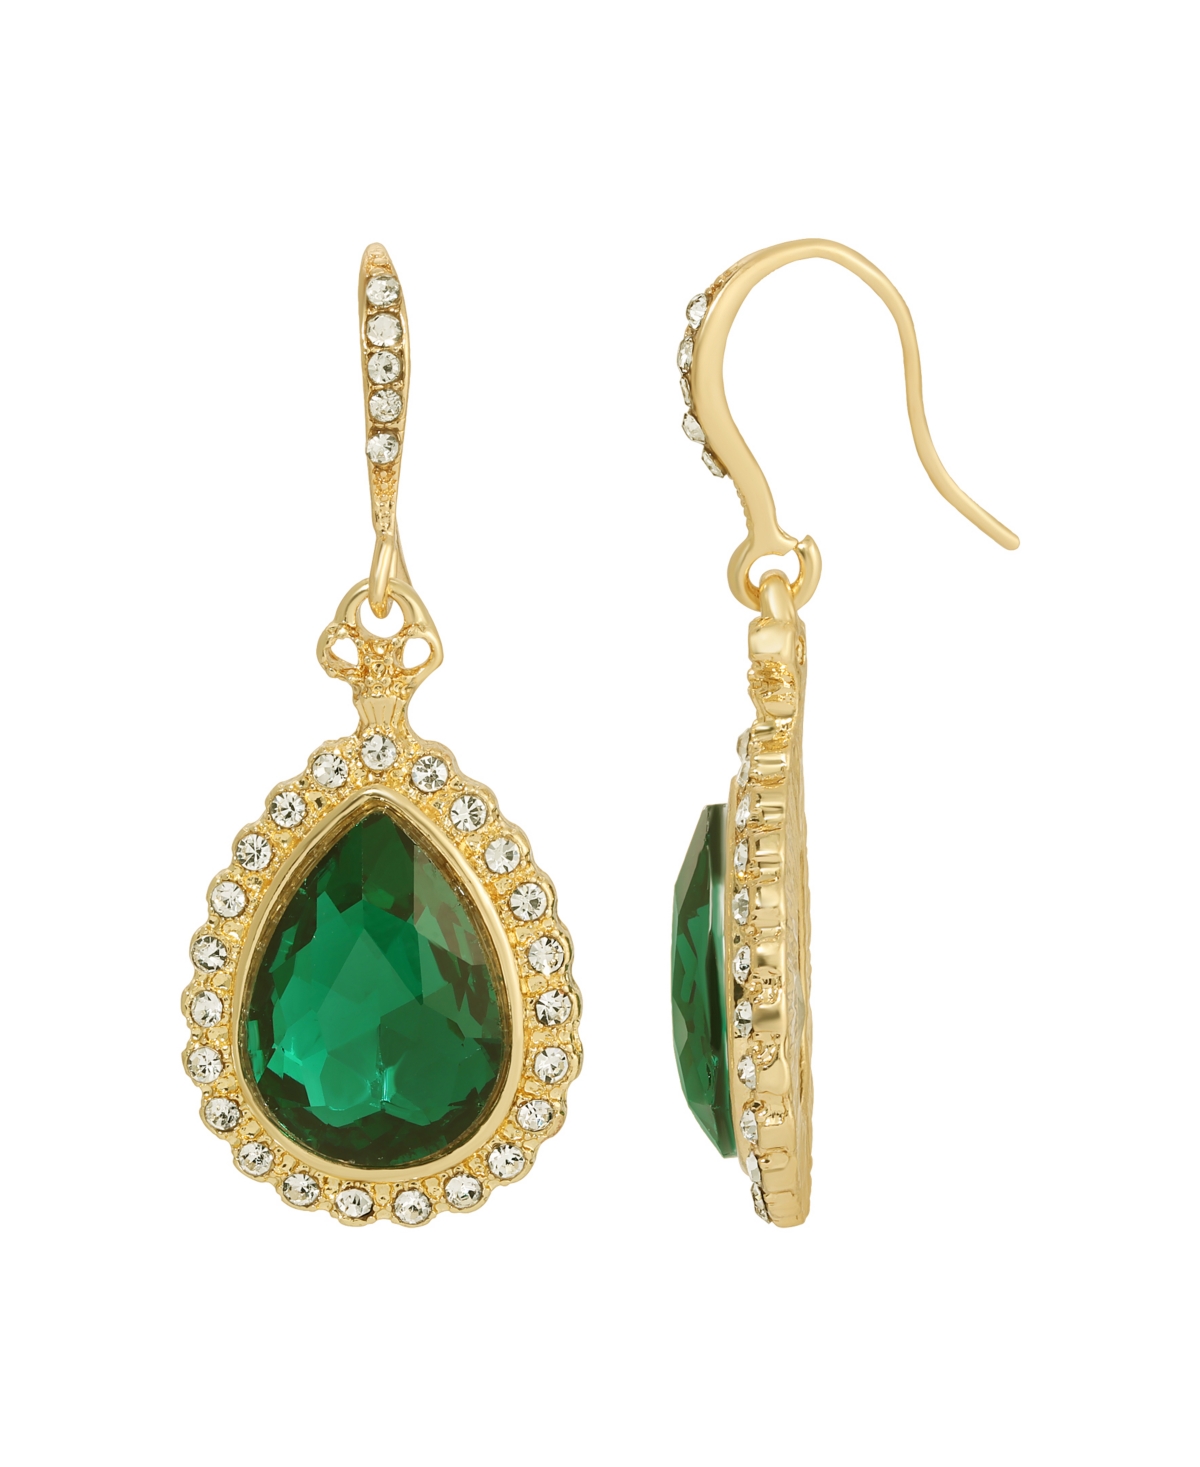 Vintage Style Jewelry, Retro Jewelry 2028 Gold-Tone Teardrop Earrings - Green $22.40 AT vintagedancer.com